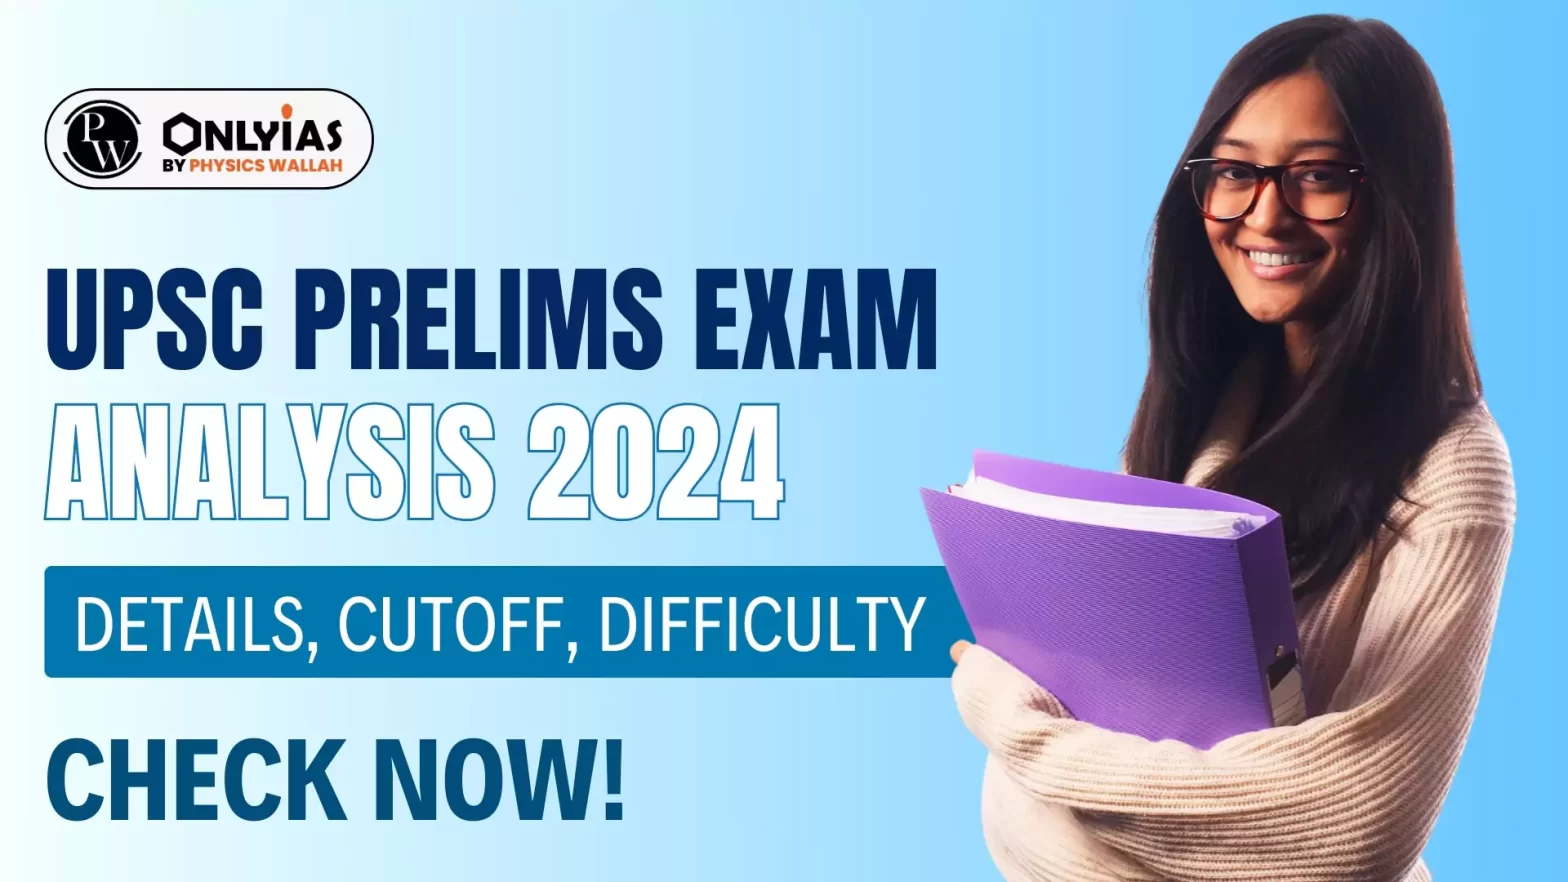 UPSC Prelims Exam Analysis 2024, Details, Cutoff, Difficulty, Check Now!